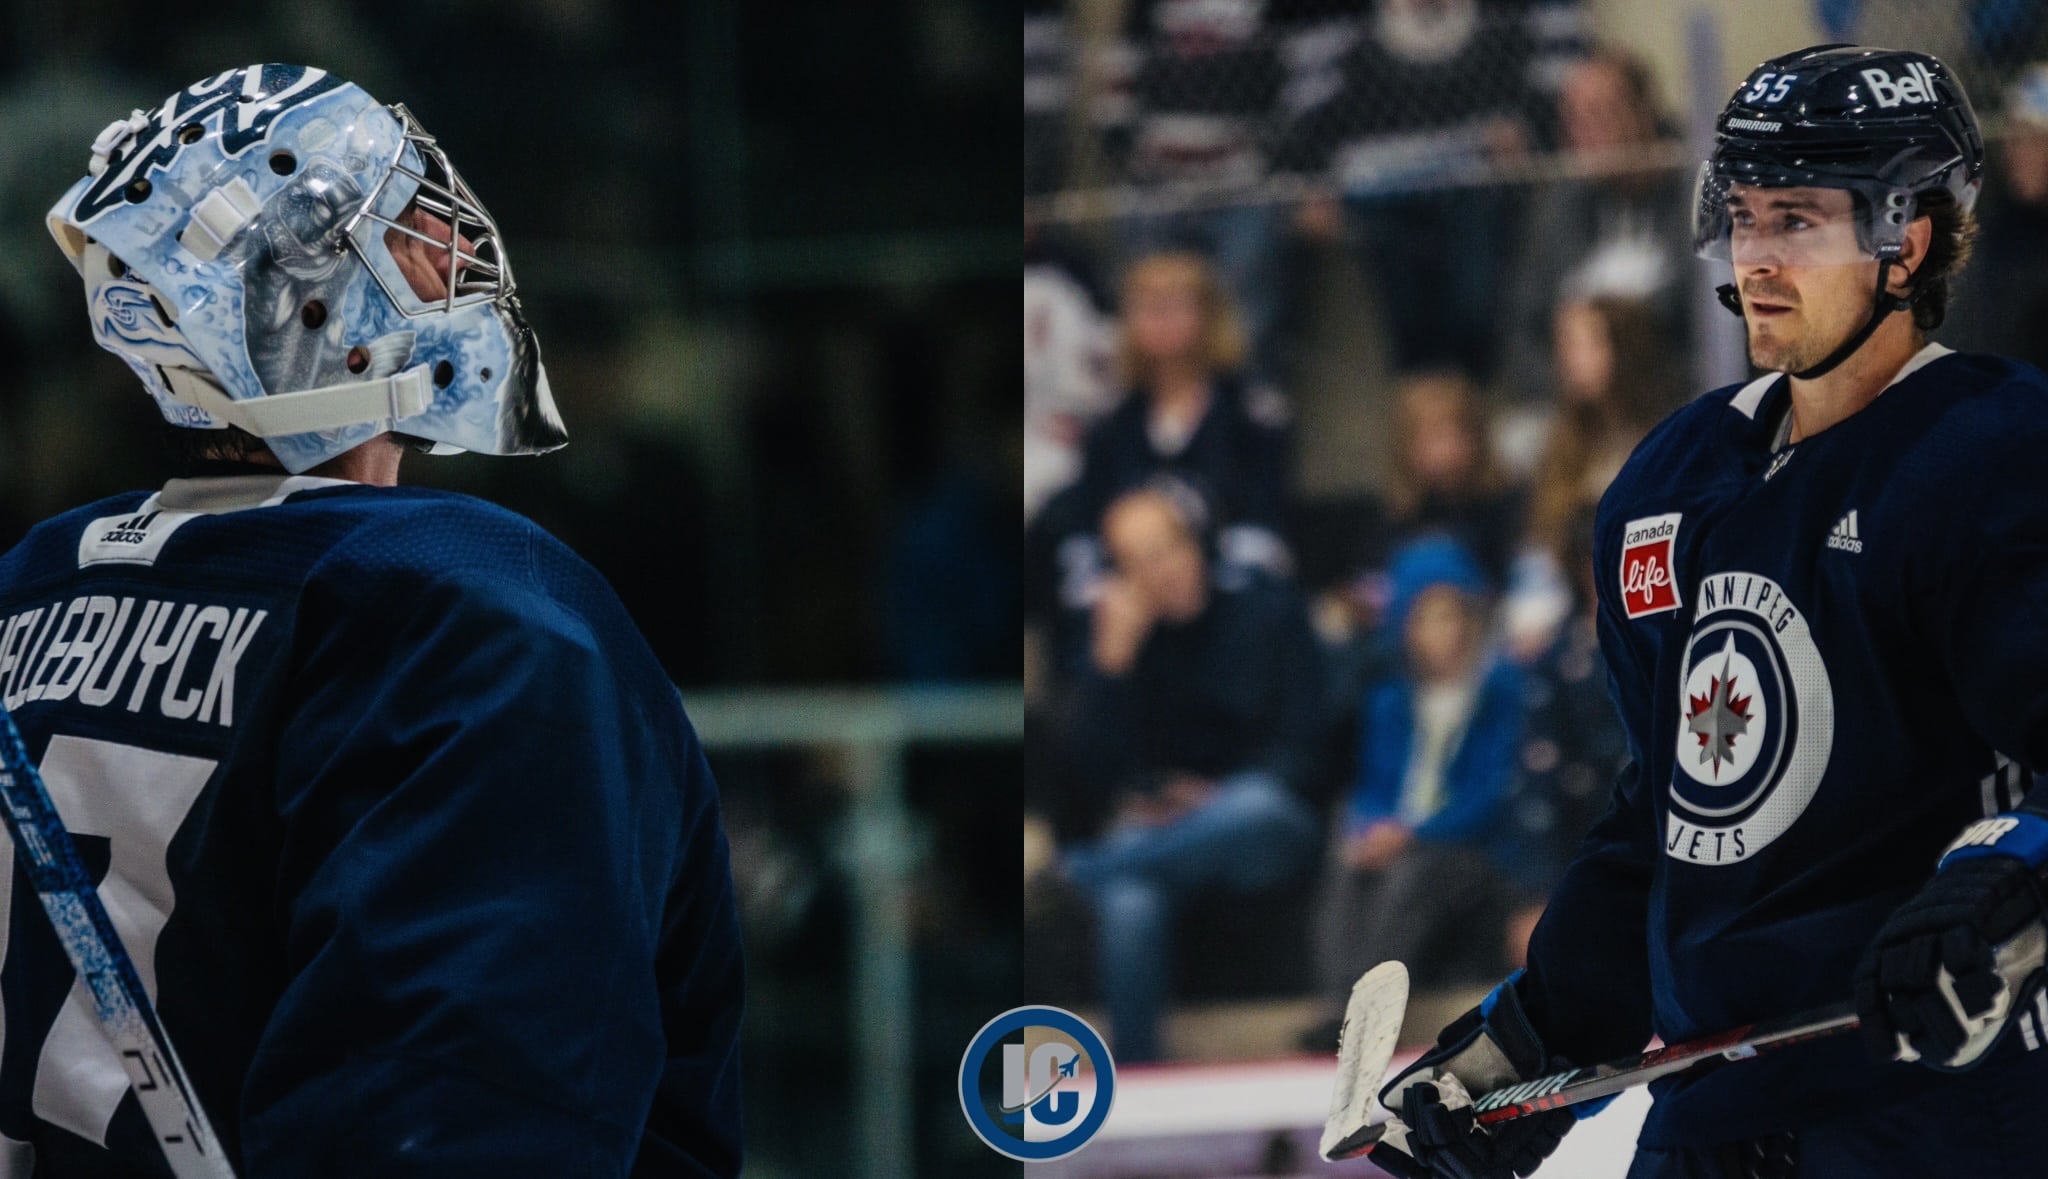 How do the Jets deal with Scheifele and Hellebuyck? 